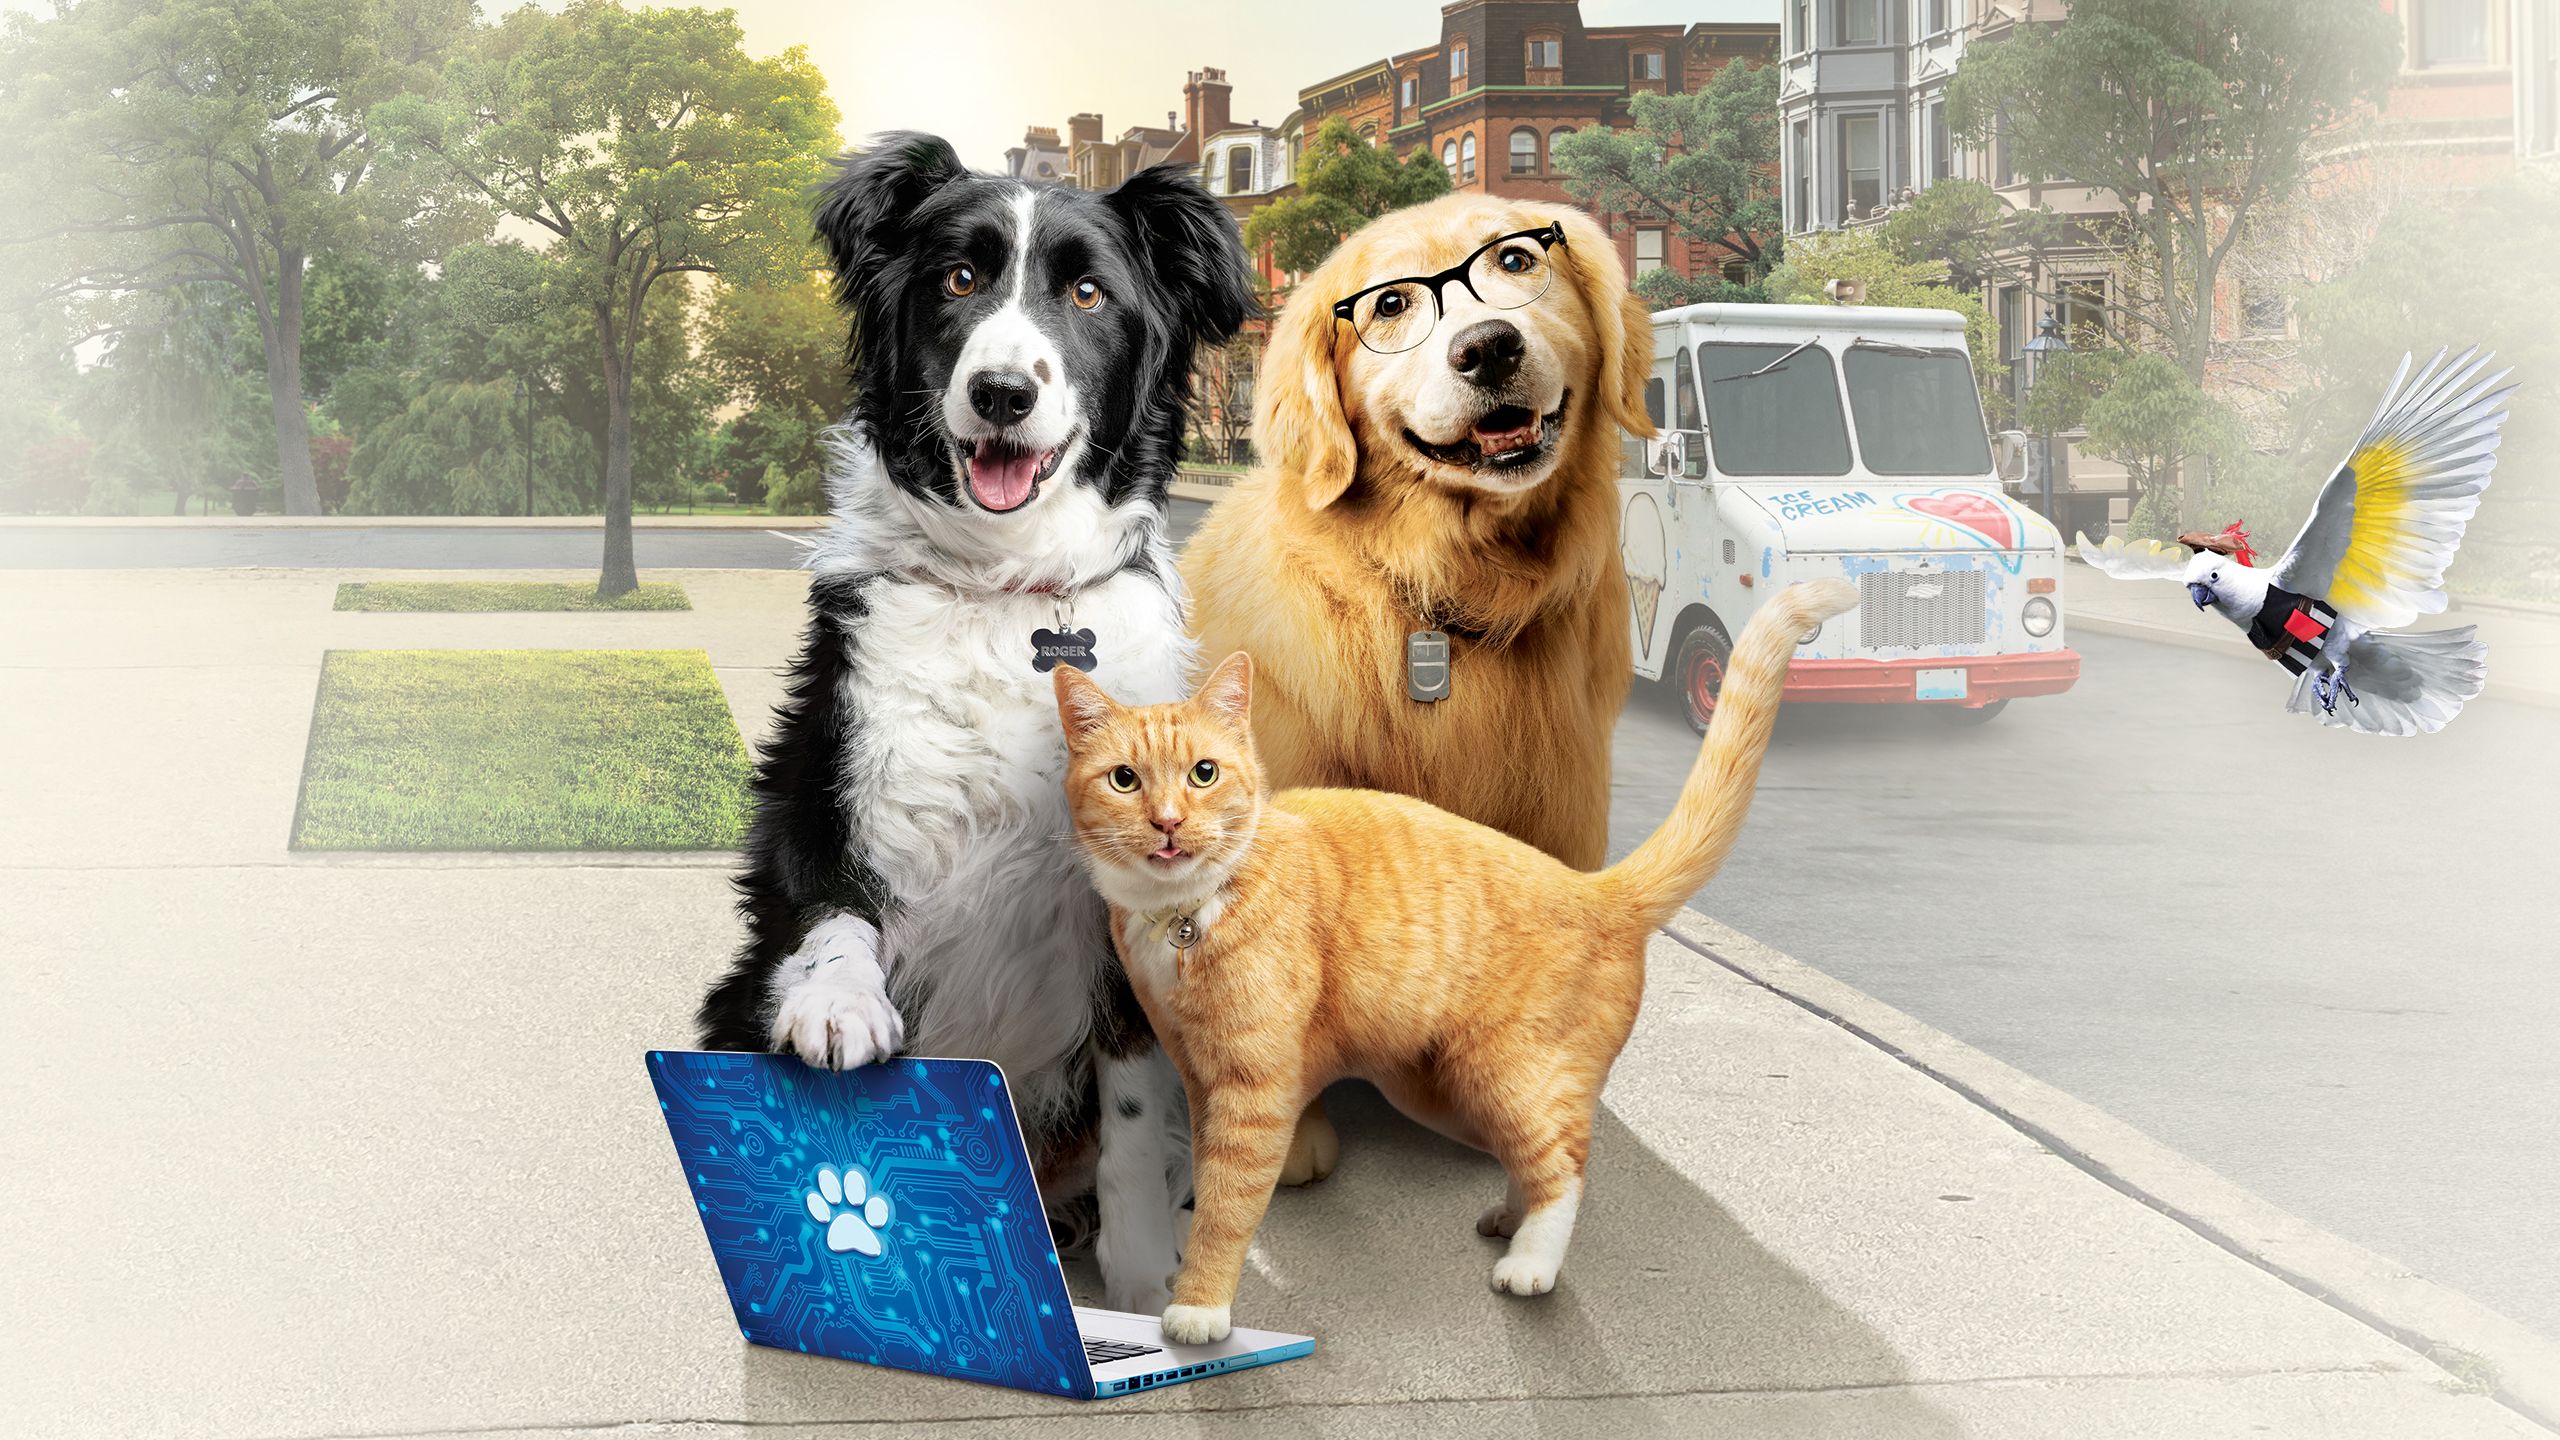 Cats & Dogs 3 Paws Unite Full Movie Movies Anywhere